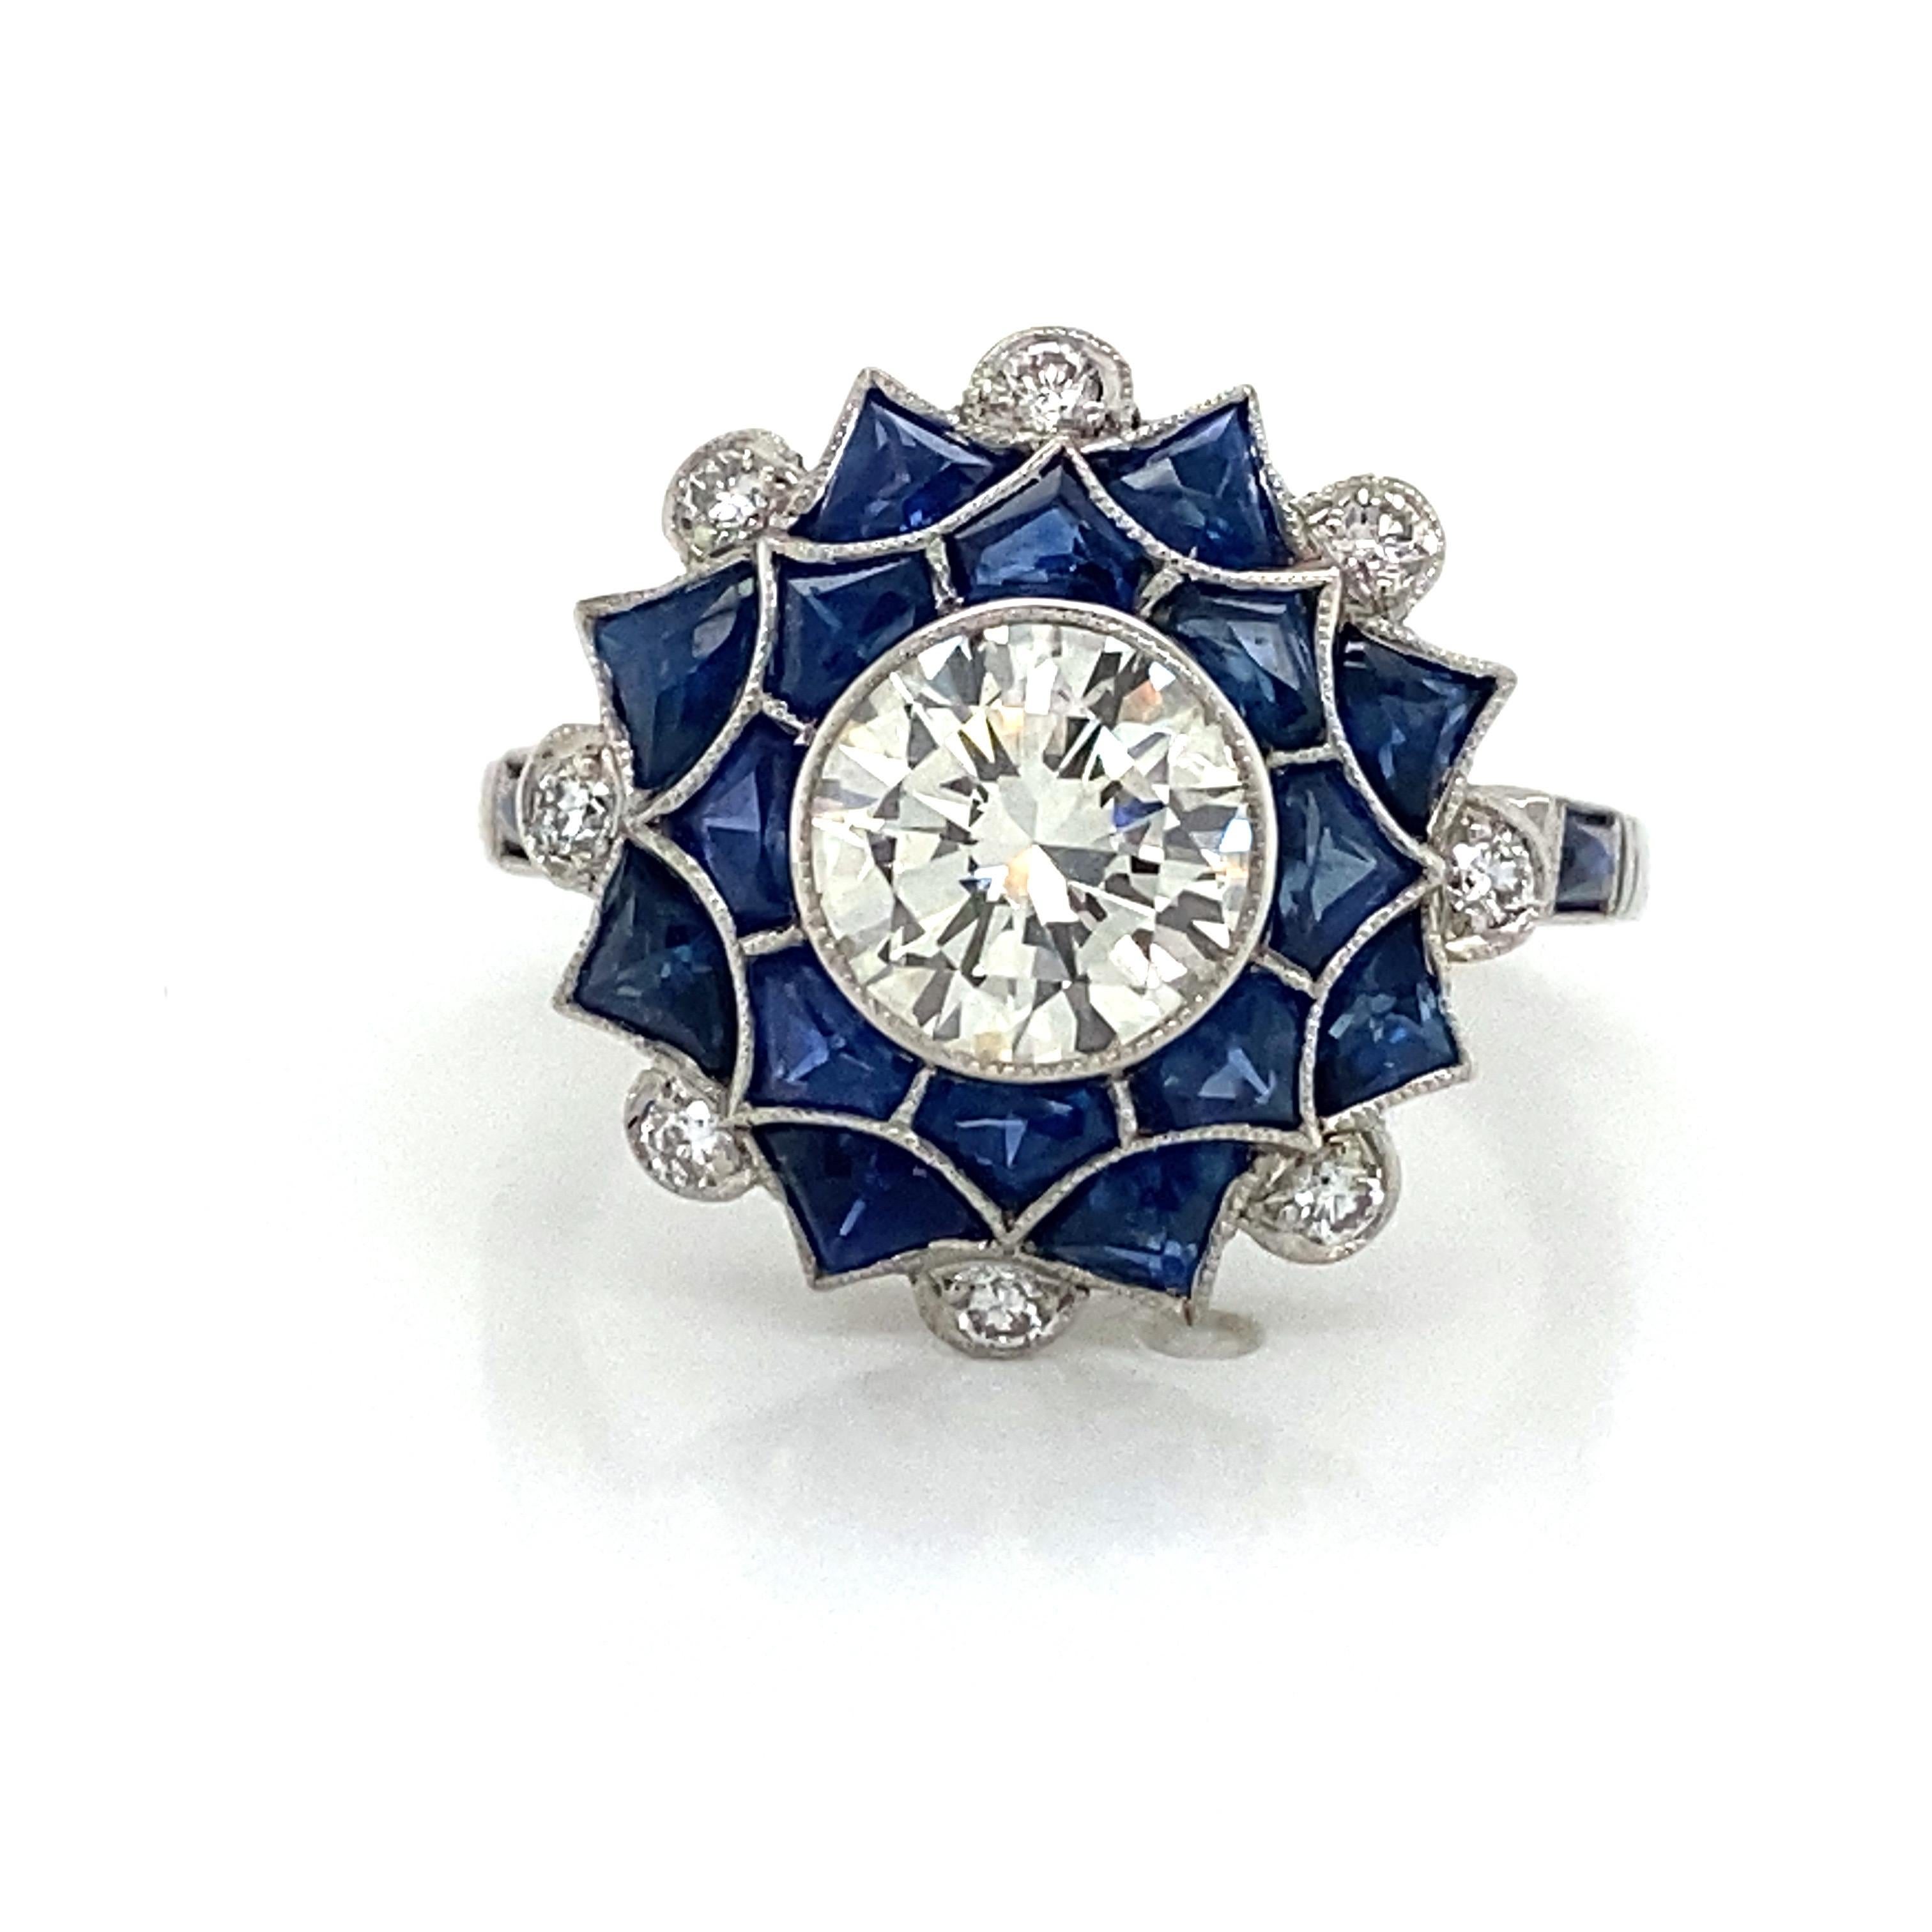 Diamond and Sapphire Ring in Platinum.  Round Brilliant Cut Diamonds weighing 1.75 carat total weight, including 1.50 carat center, J-K in color and VS in clarity and (16) Sapphires weighing 2.40 carat total weight are expertly set.  The Ring